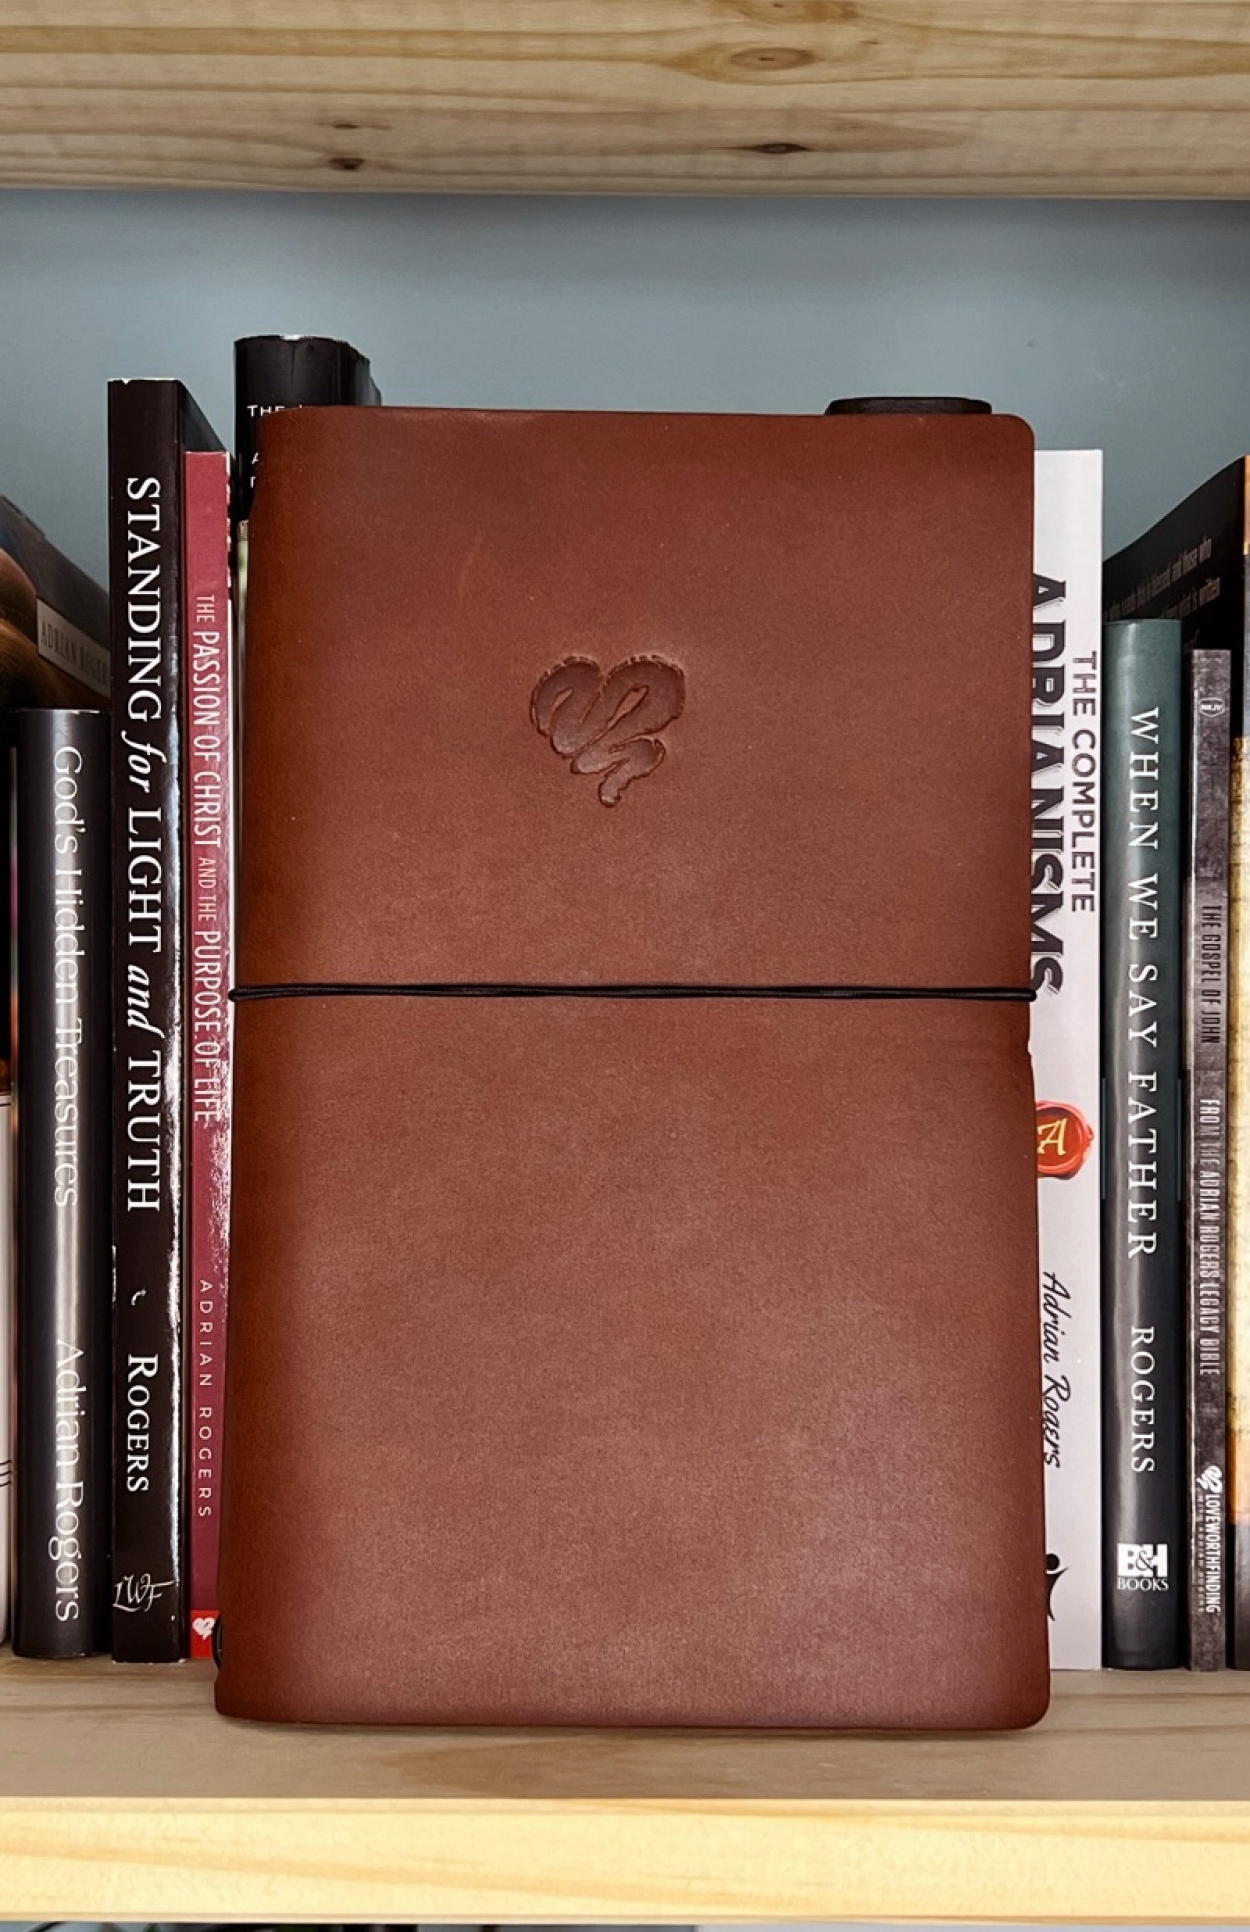 Lc leather journal cover BOOKSHELF